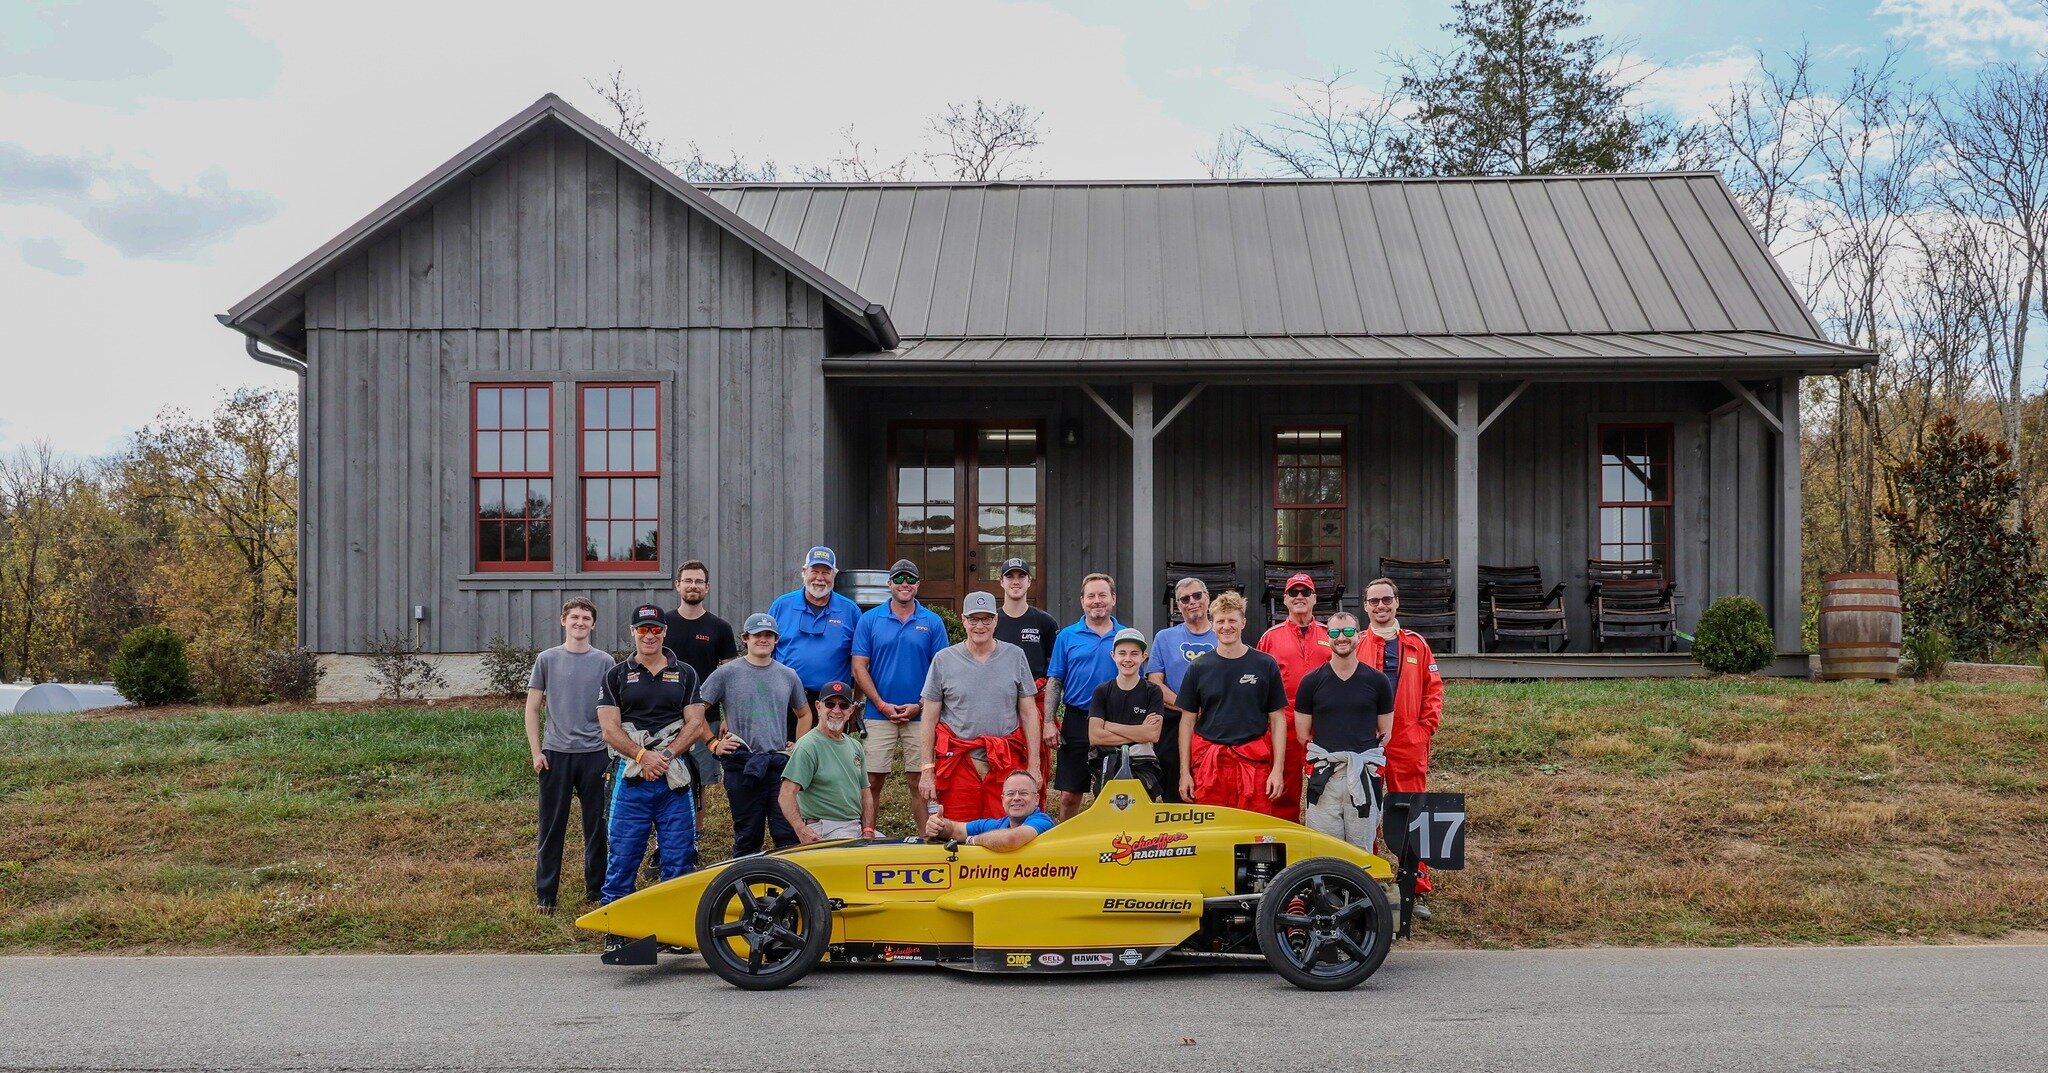 Finishing out the year on a high note: Our first SCCA Accredited School and some super fast familiar faces! Thank you for a fantastic year! 

Be on the look out for our 2024 Schedule release coming in November! We cannot wait to get back on track!

 